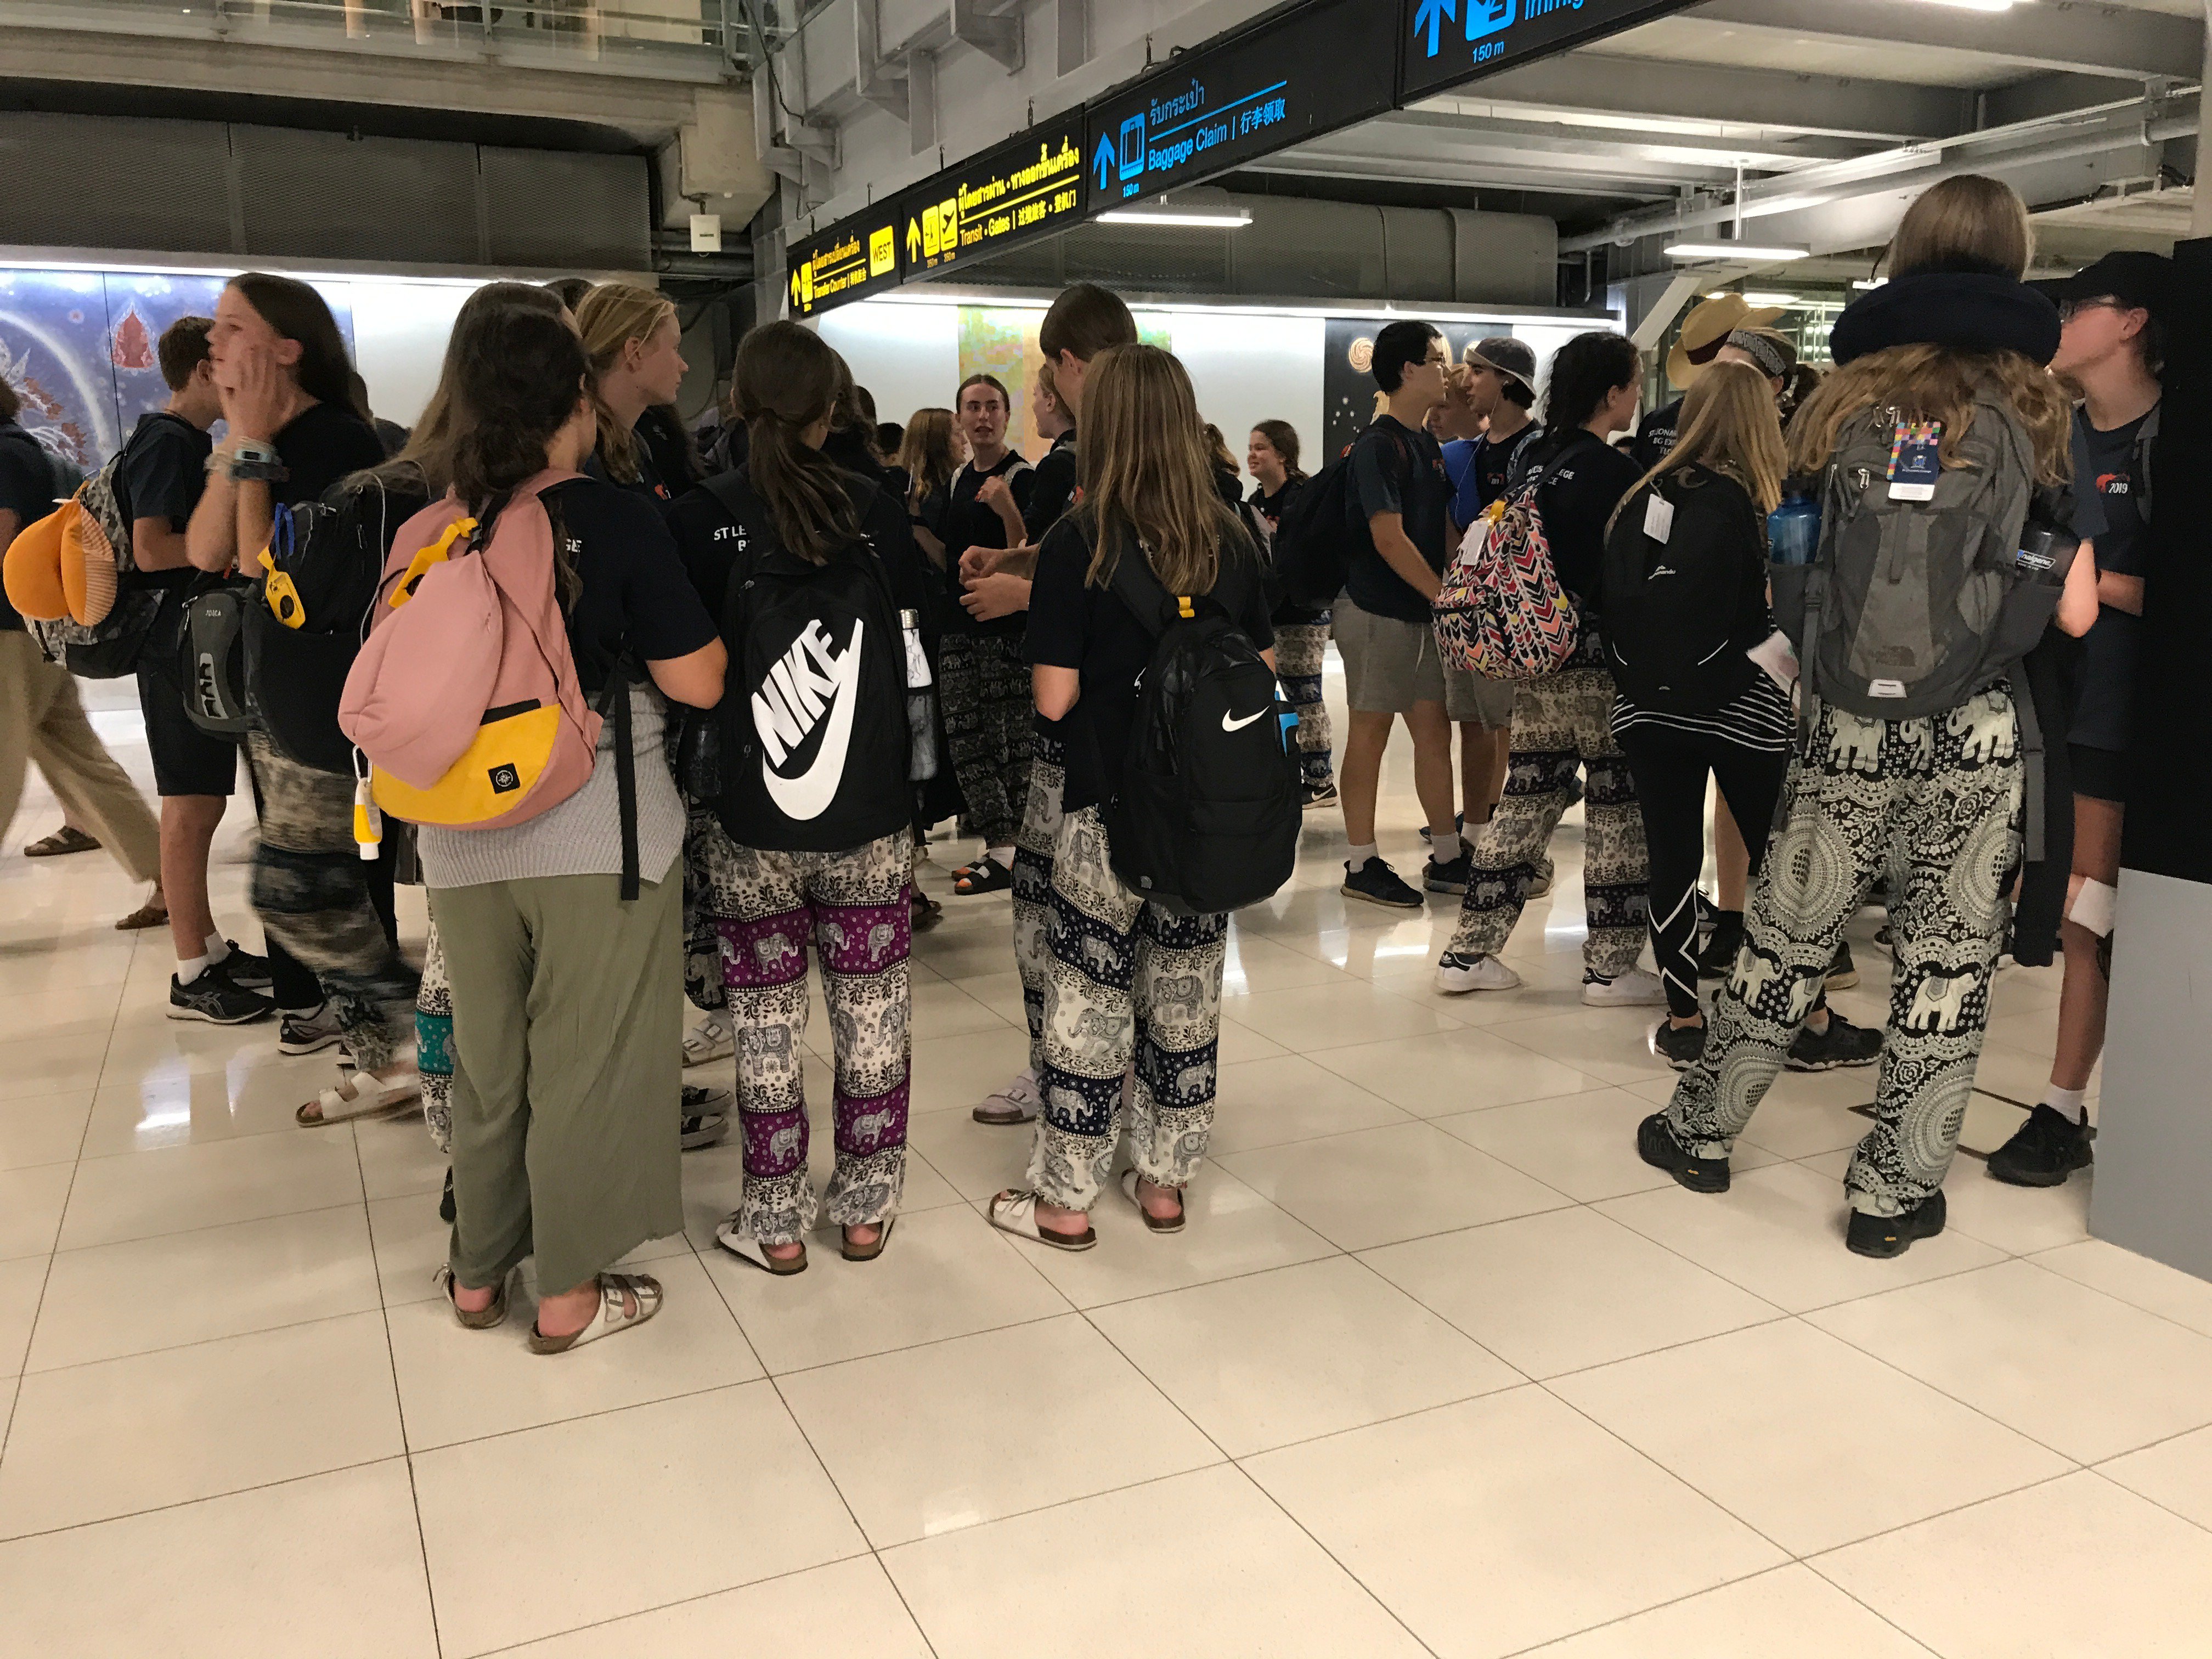 Chayut ໄຊຢຸດ on X: An unscientific approach of measuring tourism in # Thailand is the Elephant Pants Index. Mostly bought and worn by first-time  visitors to the kingdom. 🐘So more pants, more arrivals.